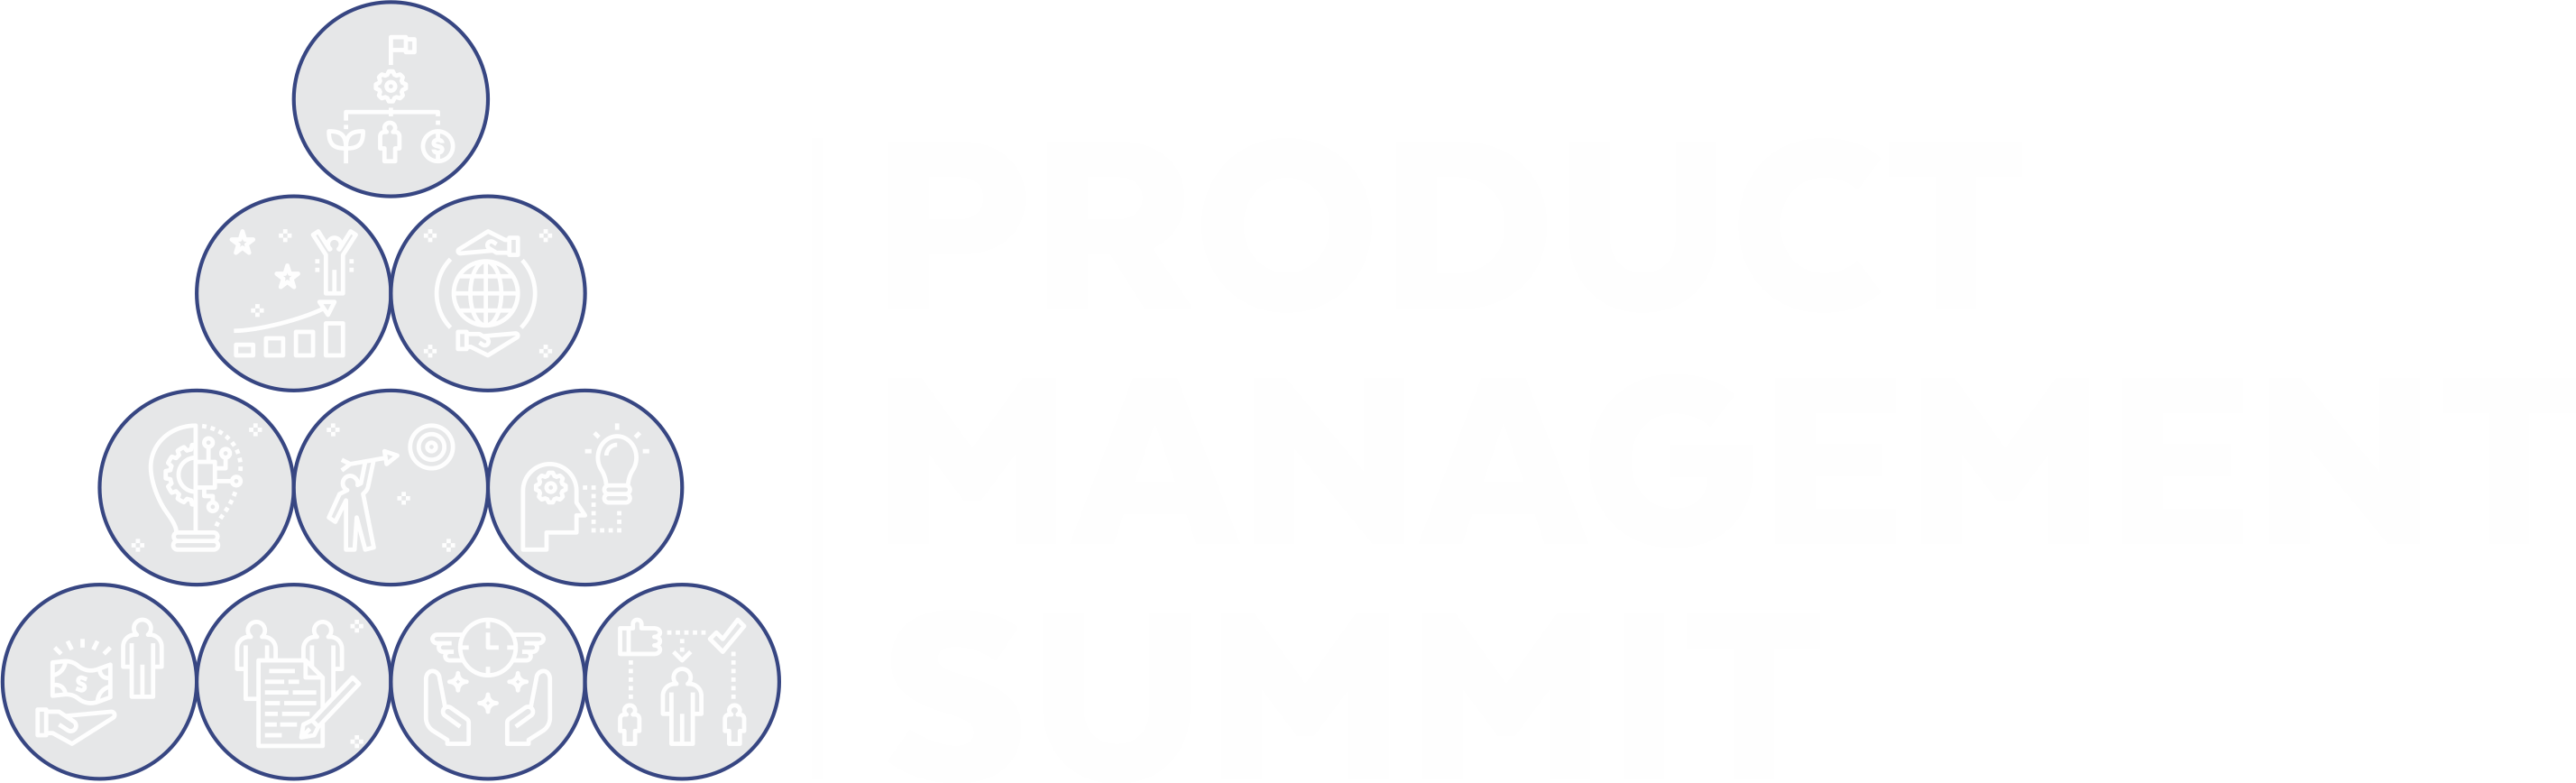 2nd Edition Product Management Summit